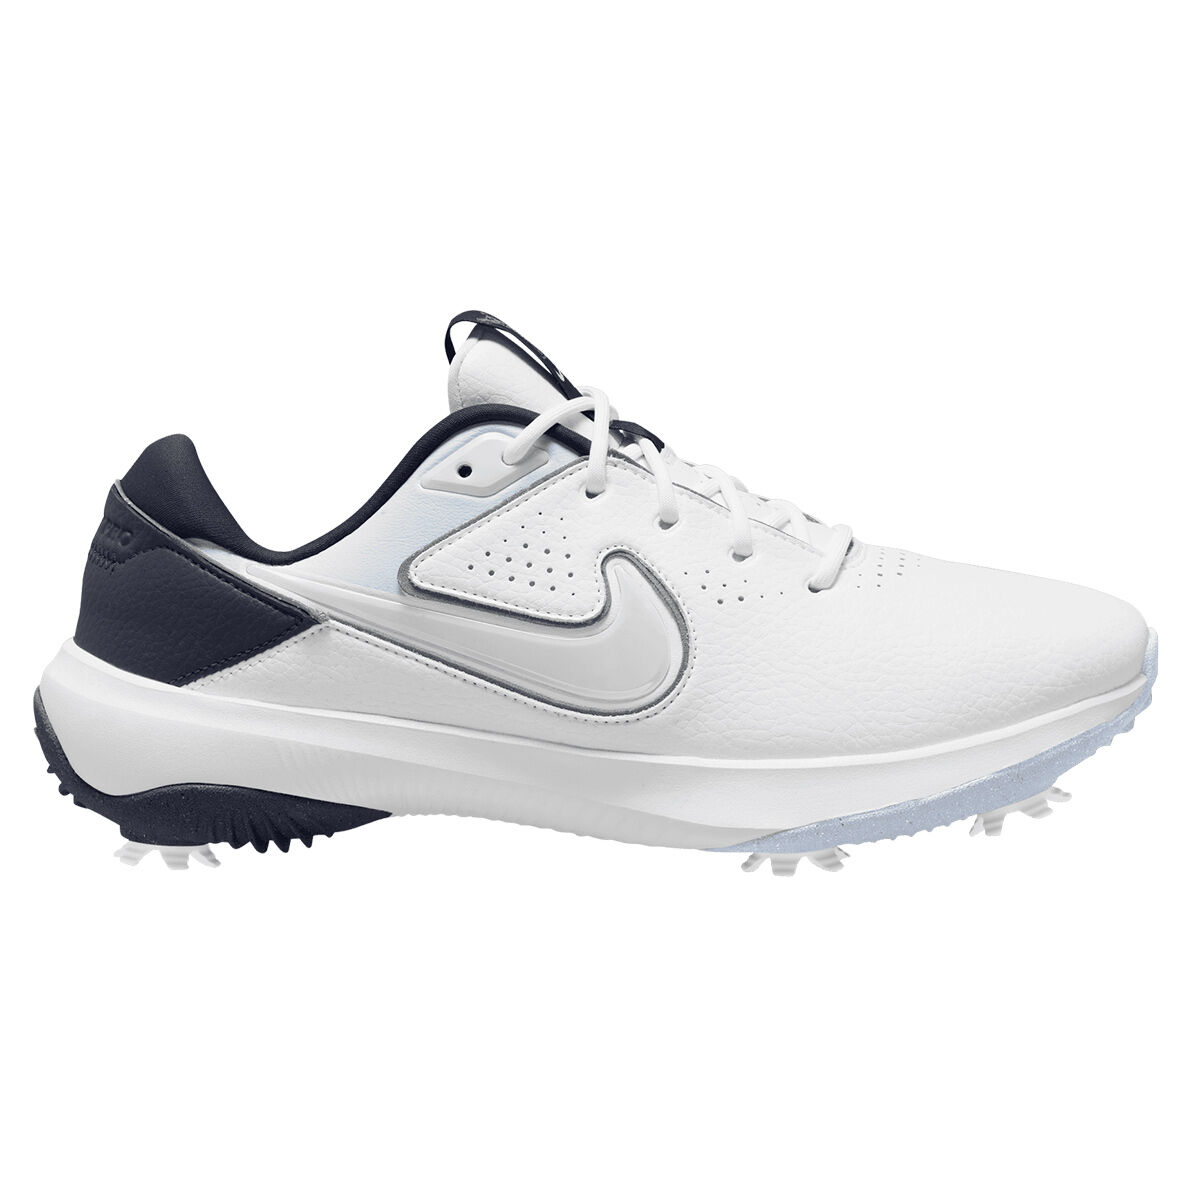 Nike Men’s Victory Pro 3 Waterproof Spiked Golf Shoes, Mens, White/football grey/obsidian, 7 | American Golf